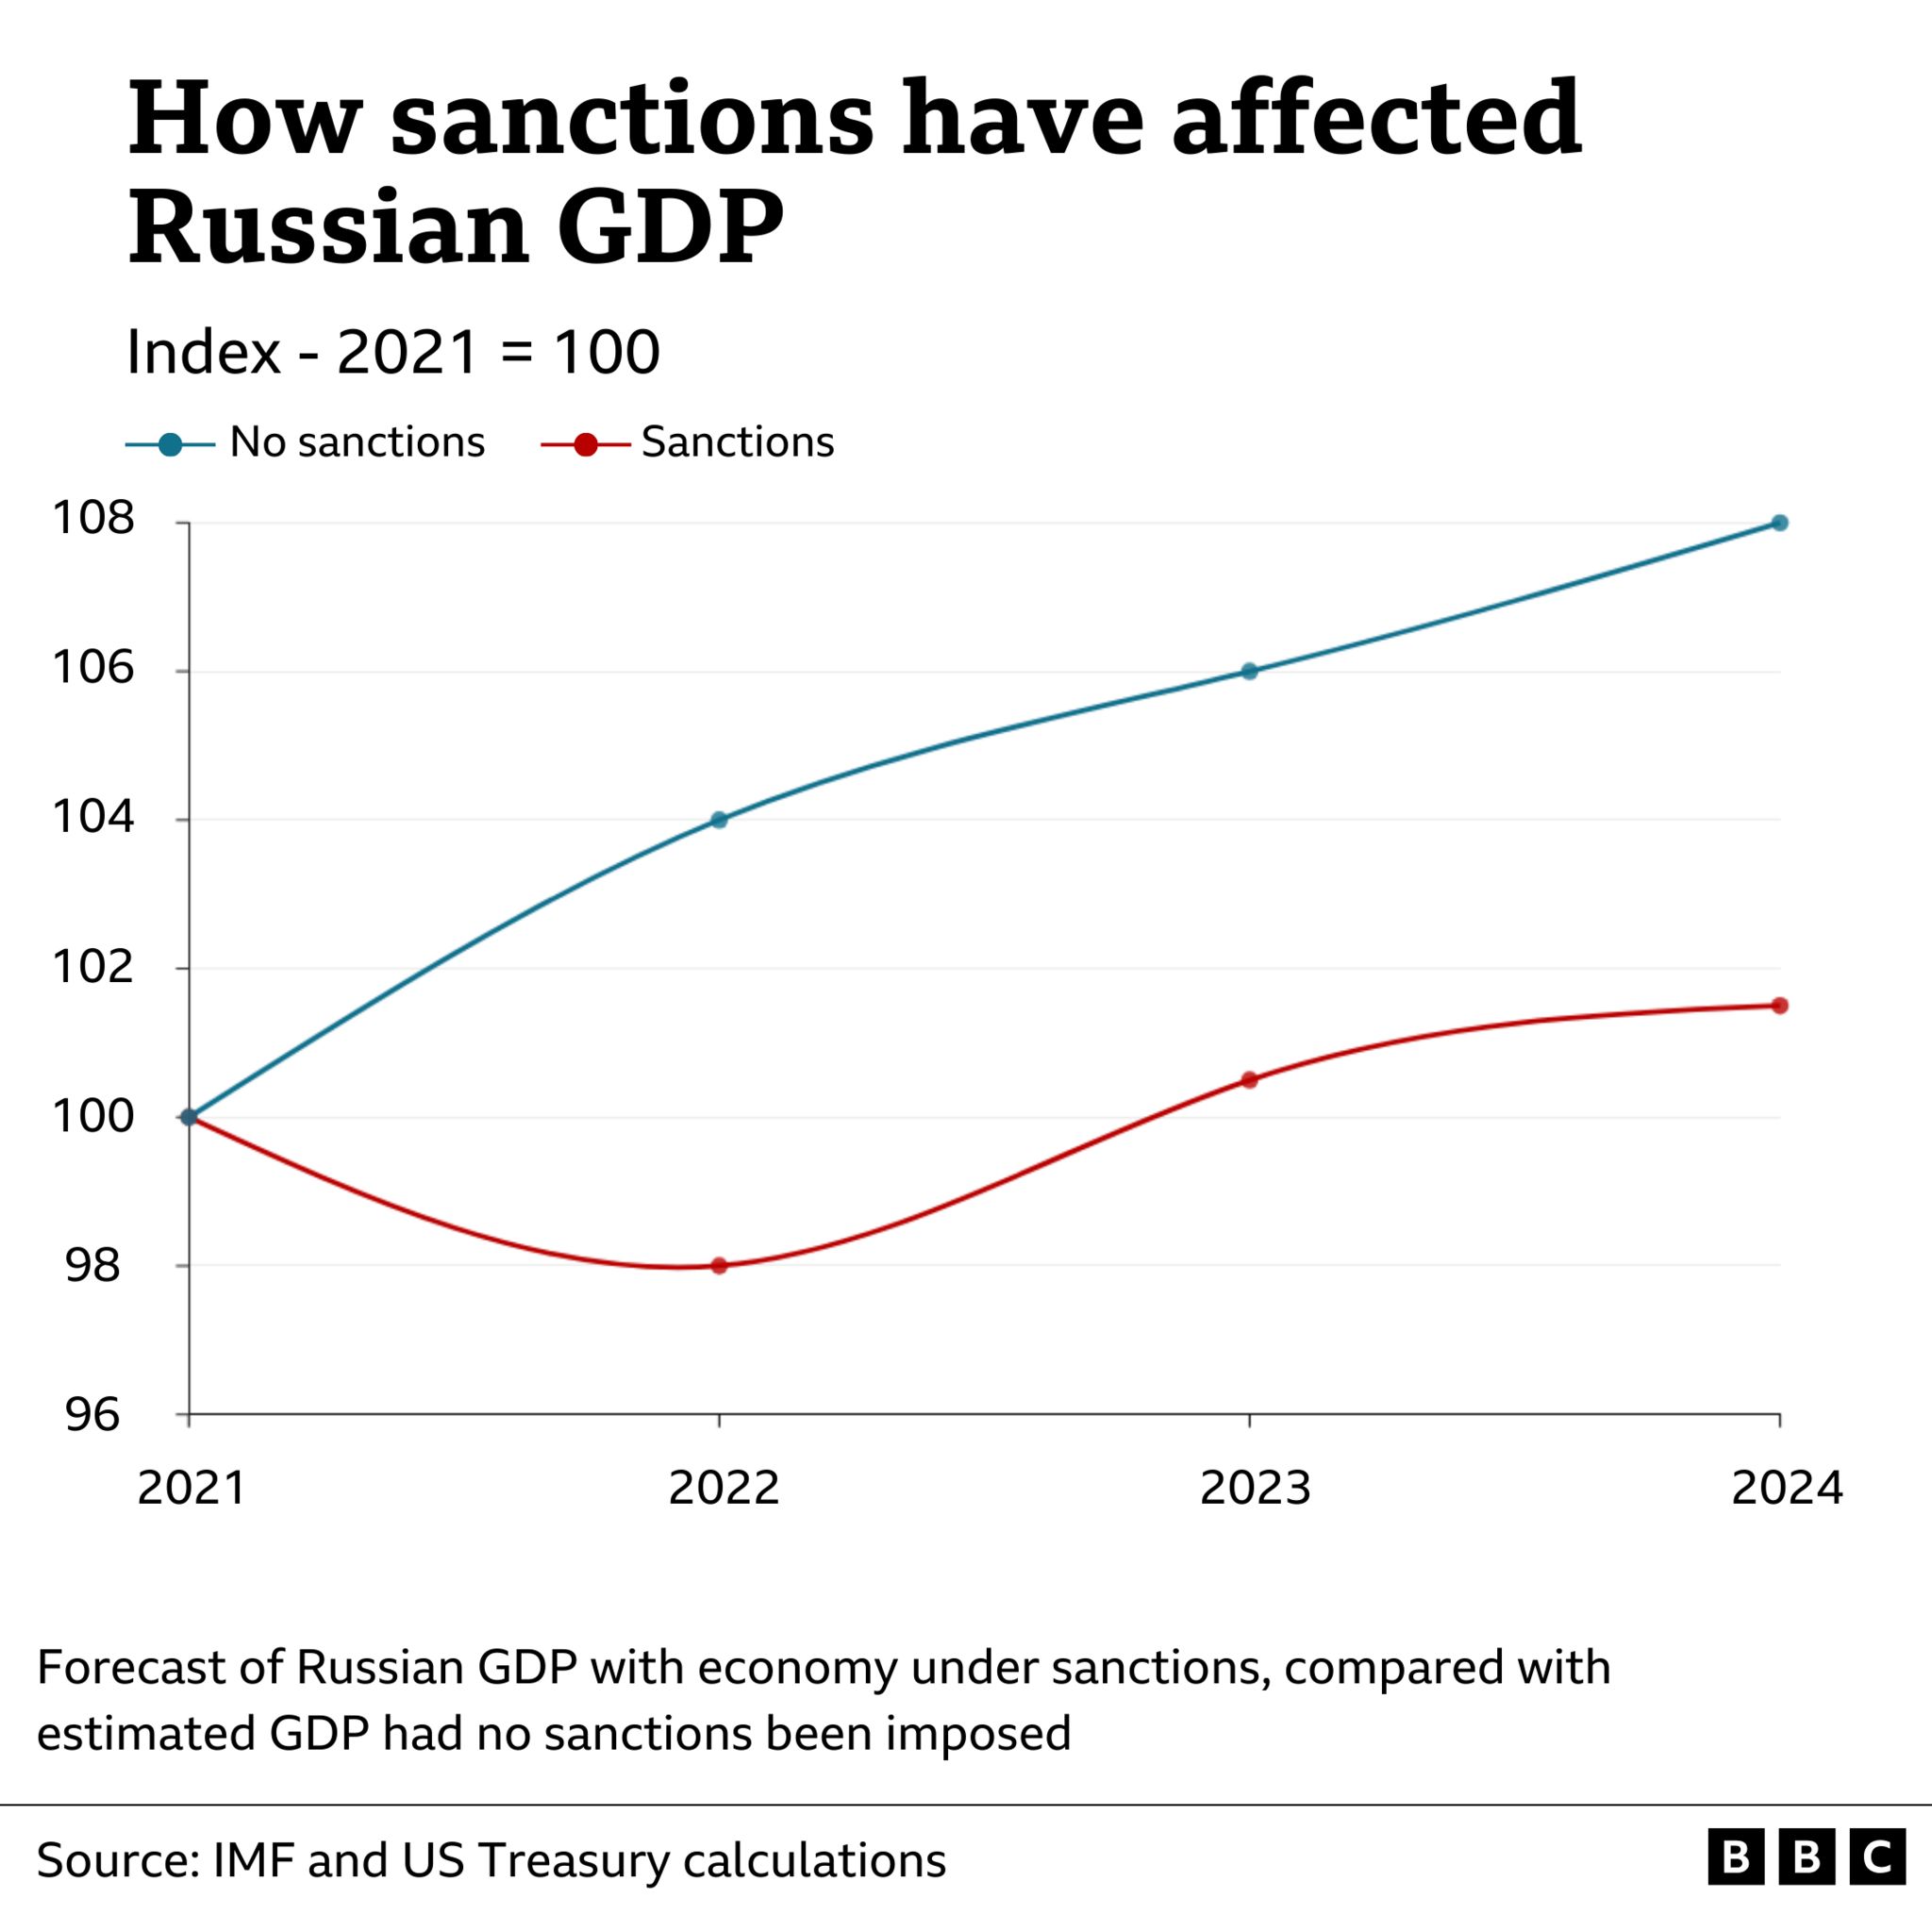 Chart showing Russian GDP growth with the economy under sanctions and estimated GDP growth had no sanctions been imposed.